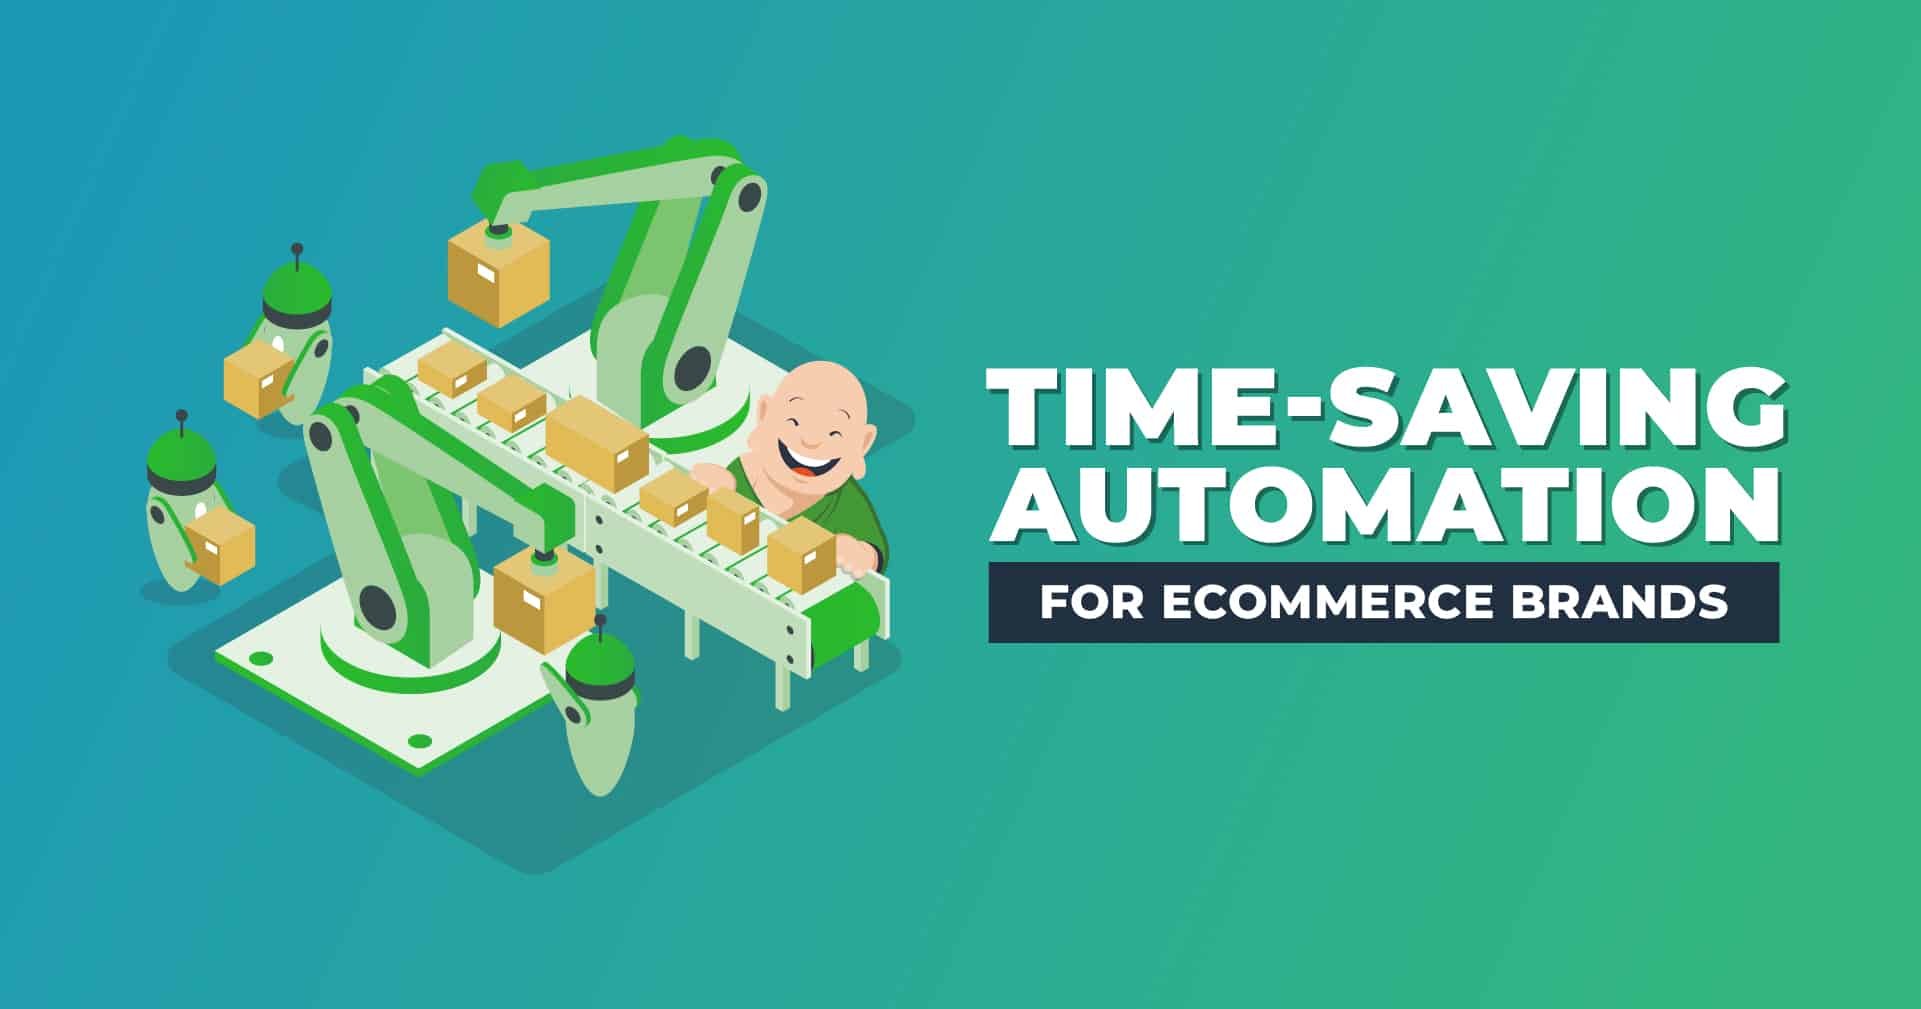 Time-Saving Automation for Ecommerce Brands